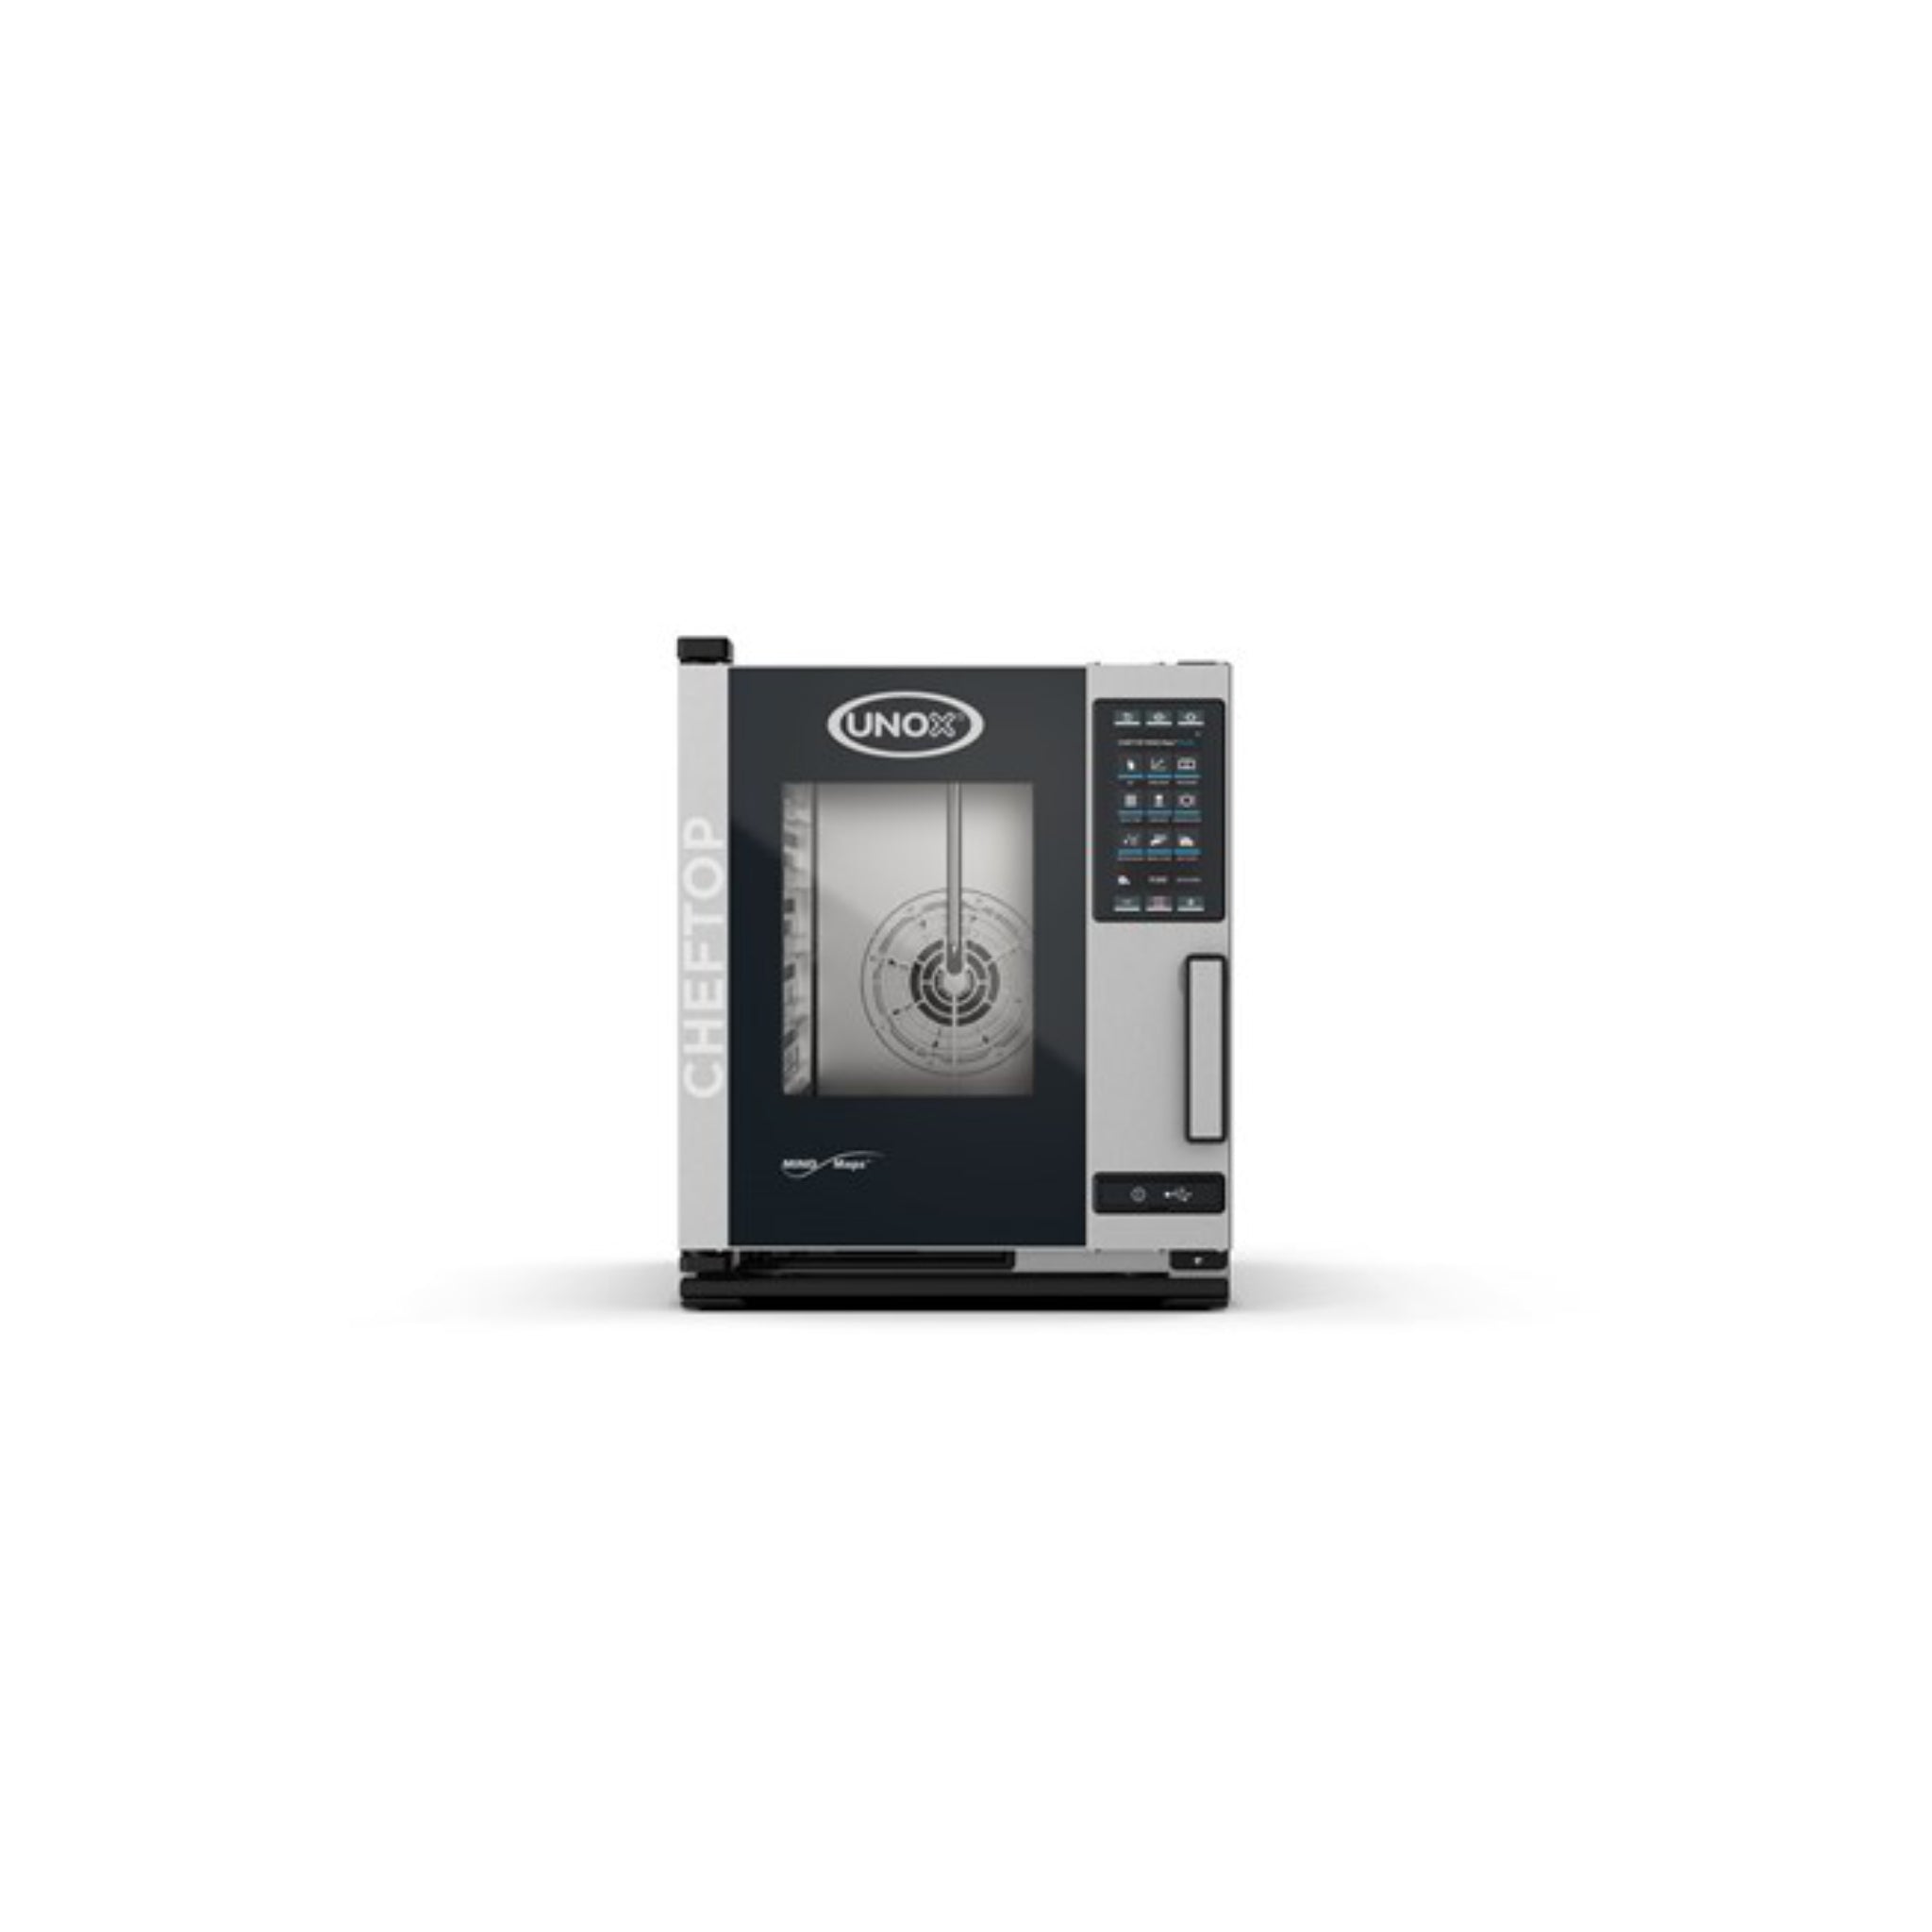 Unox CHEFTOP MIND.Maps PLUS COMPACT Combi oven 5 Tray Electric